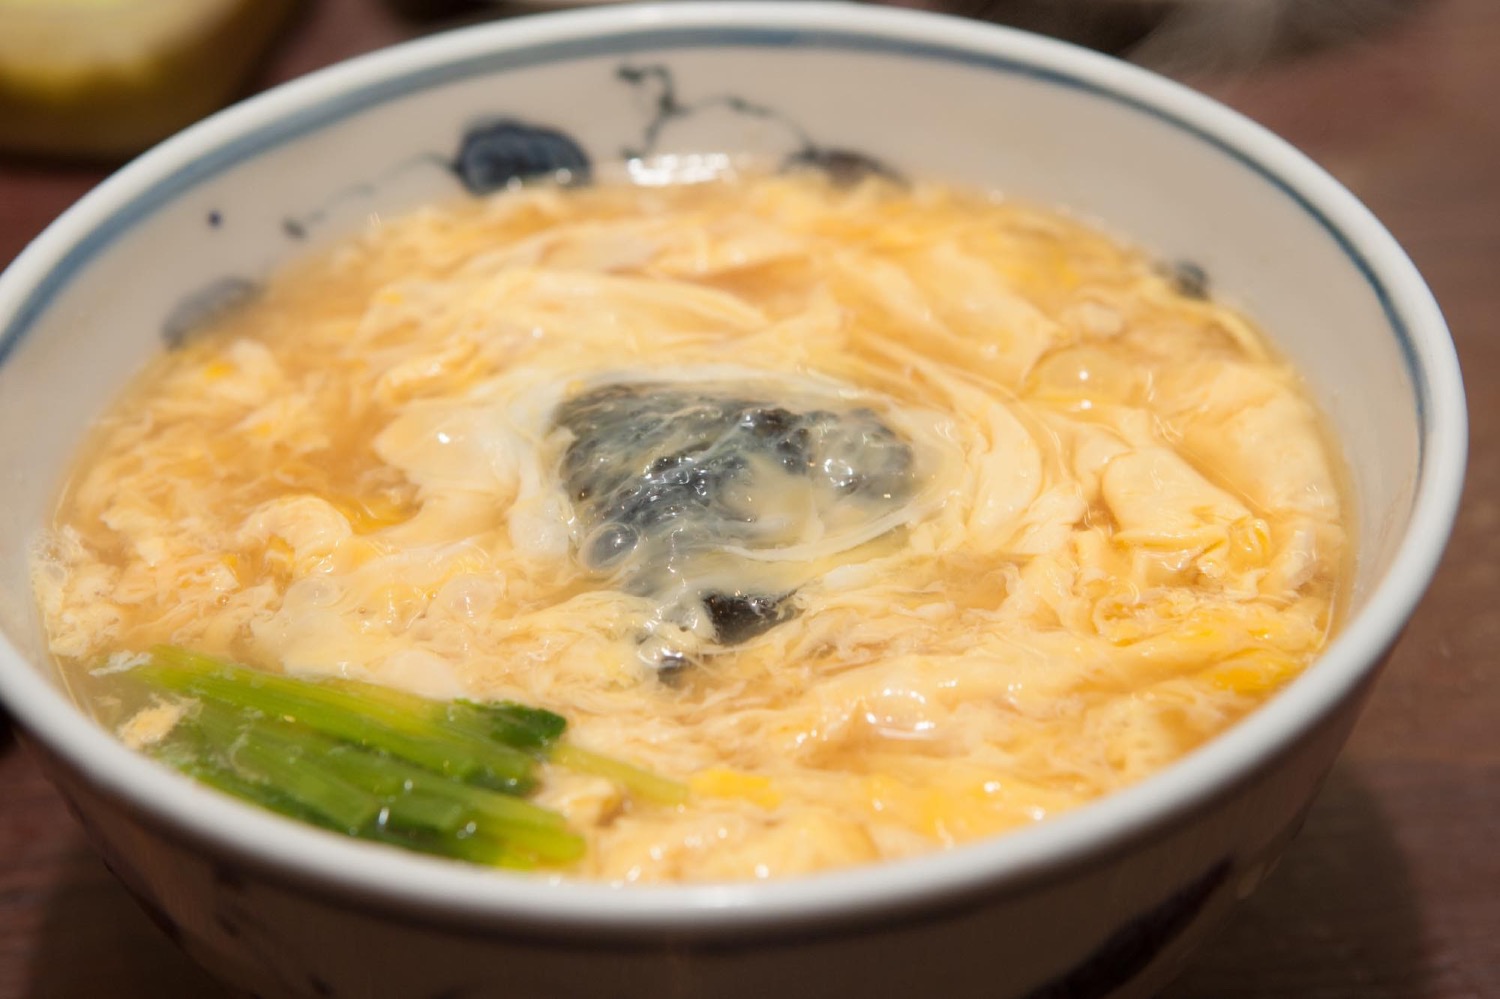 TAMAGO-TOJI（玉子とじ）: Noodles with partly-cooked egg topping